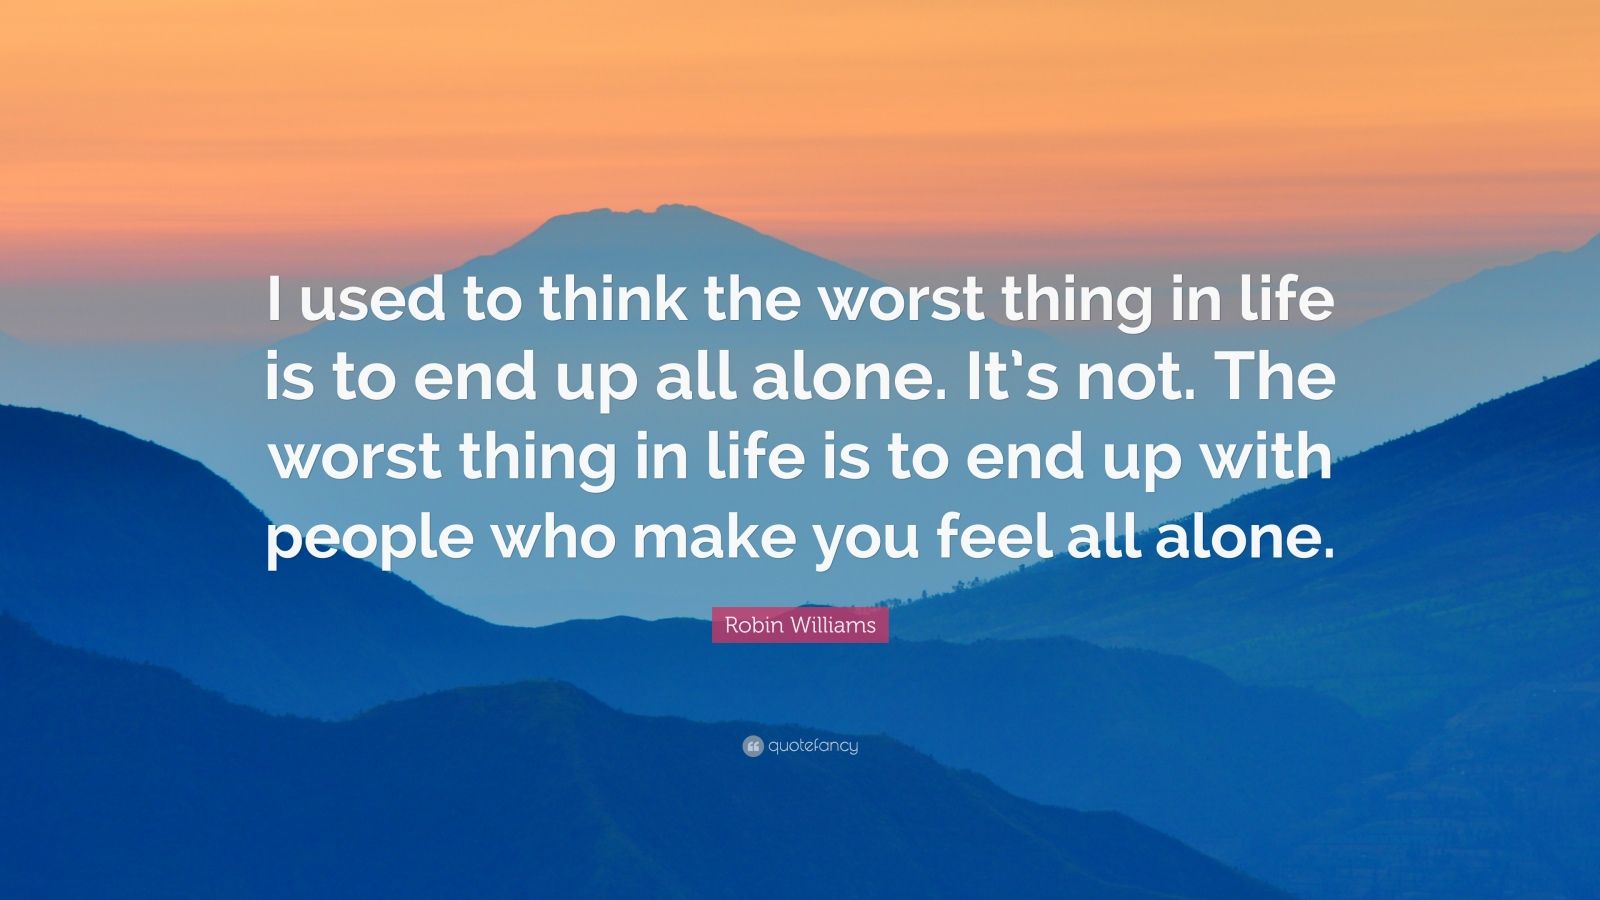 Robin Williams Quote: “I used to think the worst thing in life is to